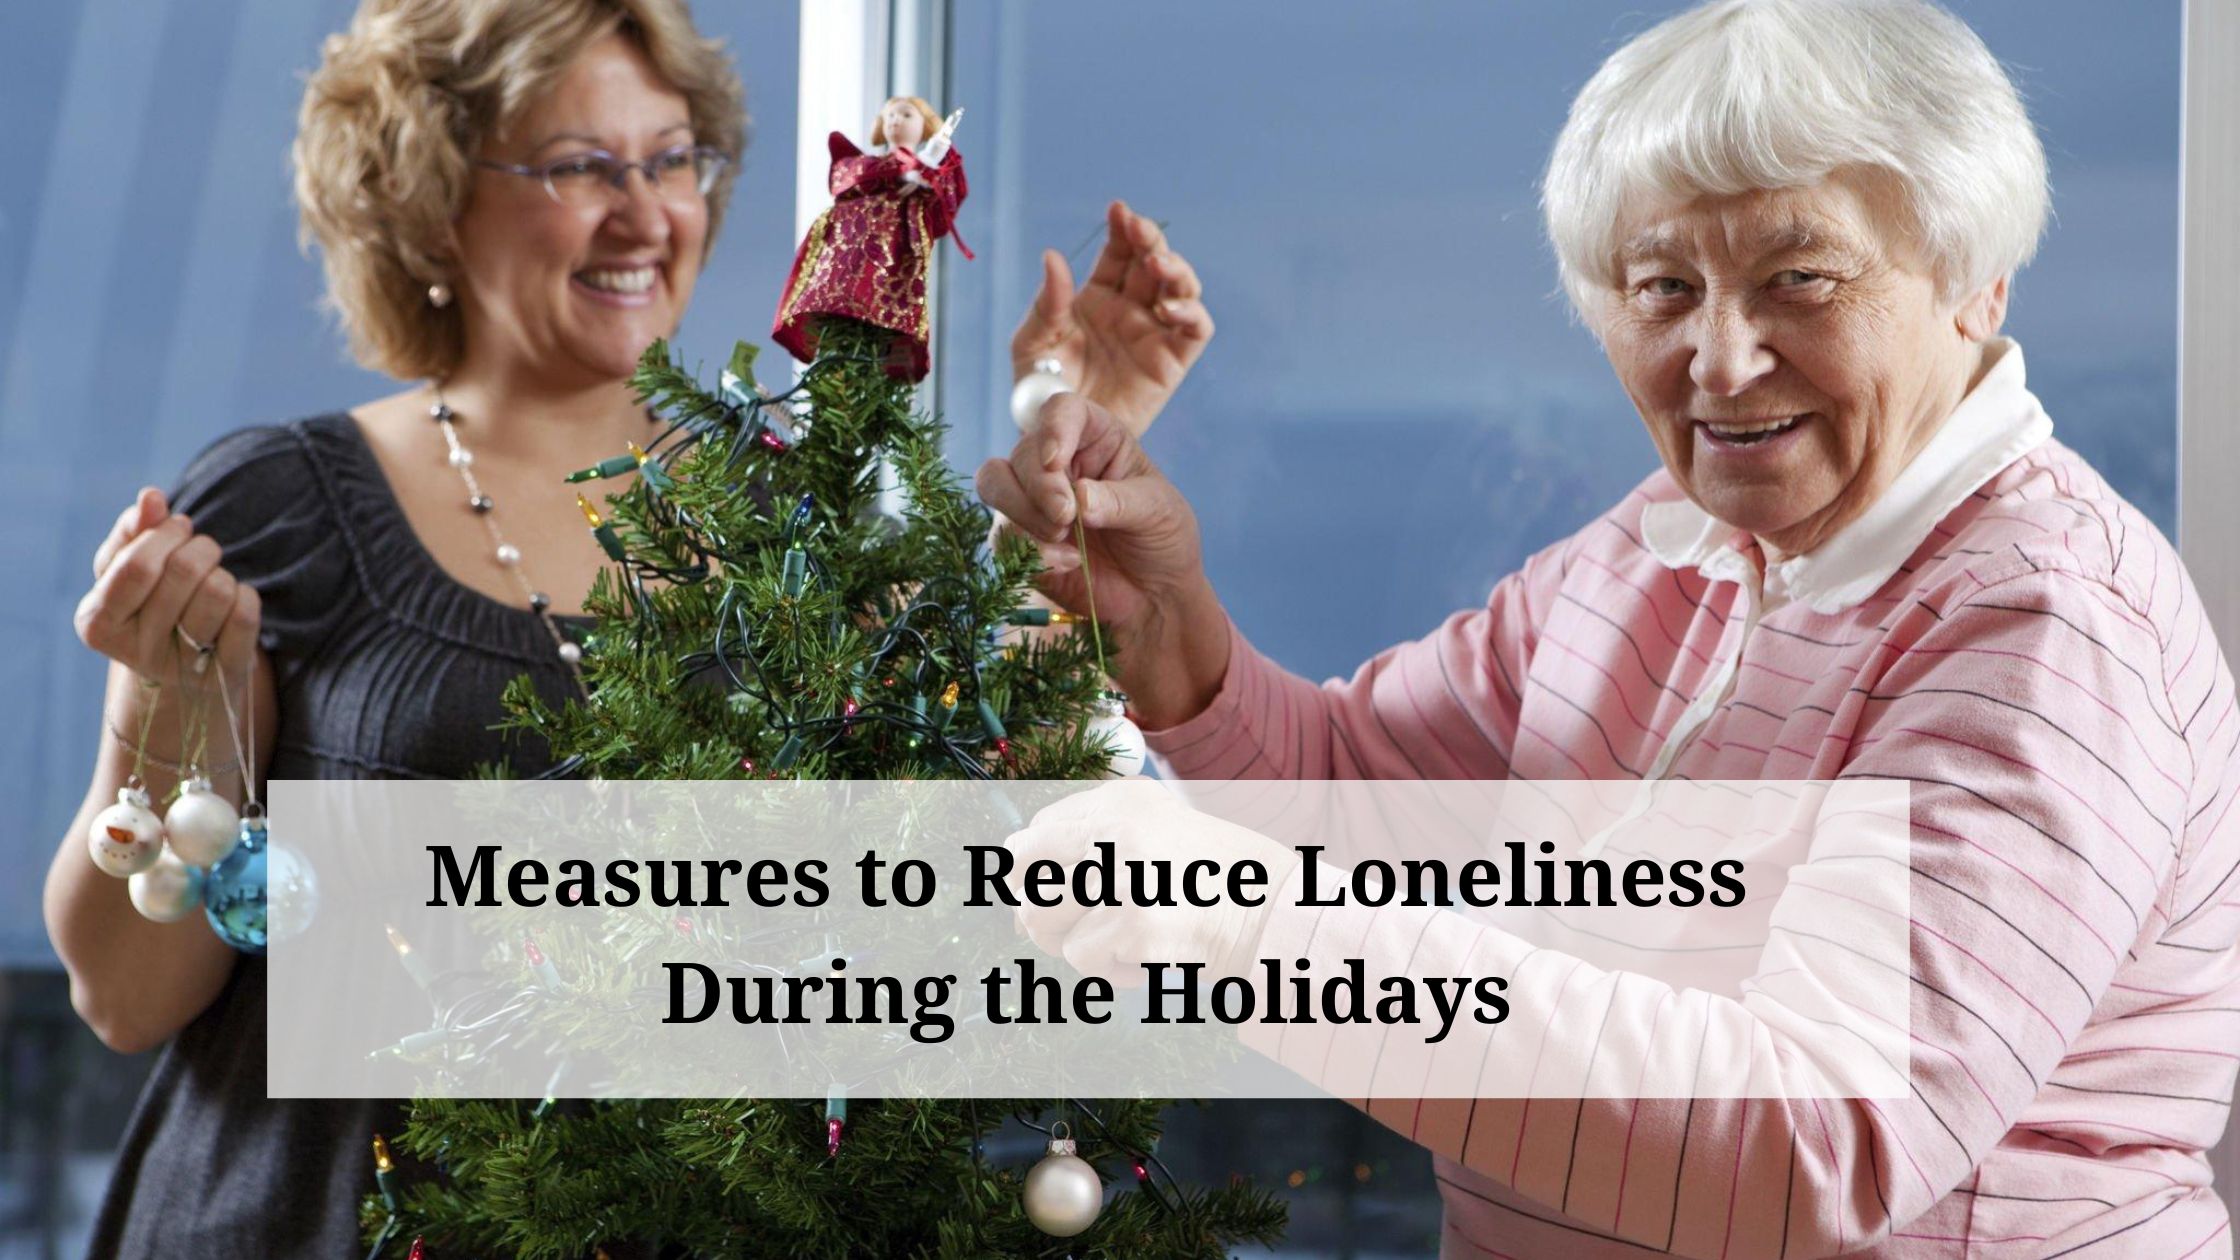 Measures to Reduce Loneliness During the Holidays